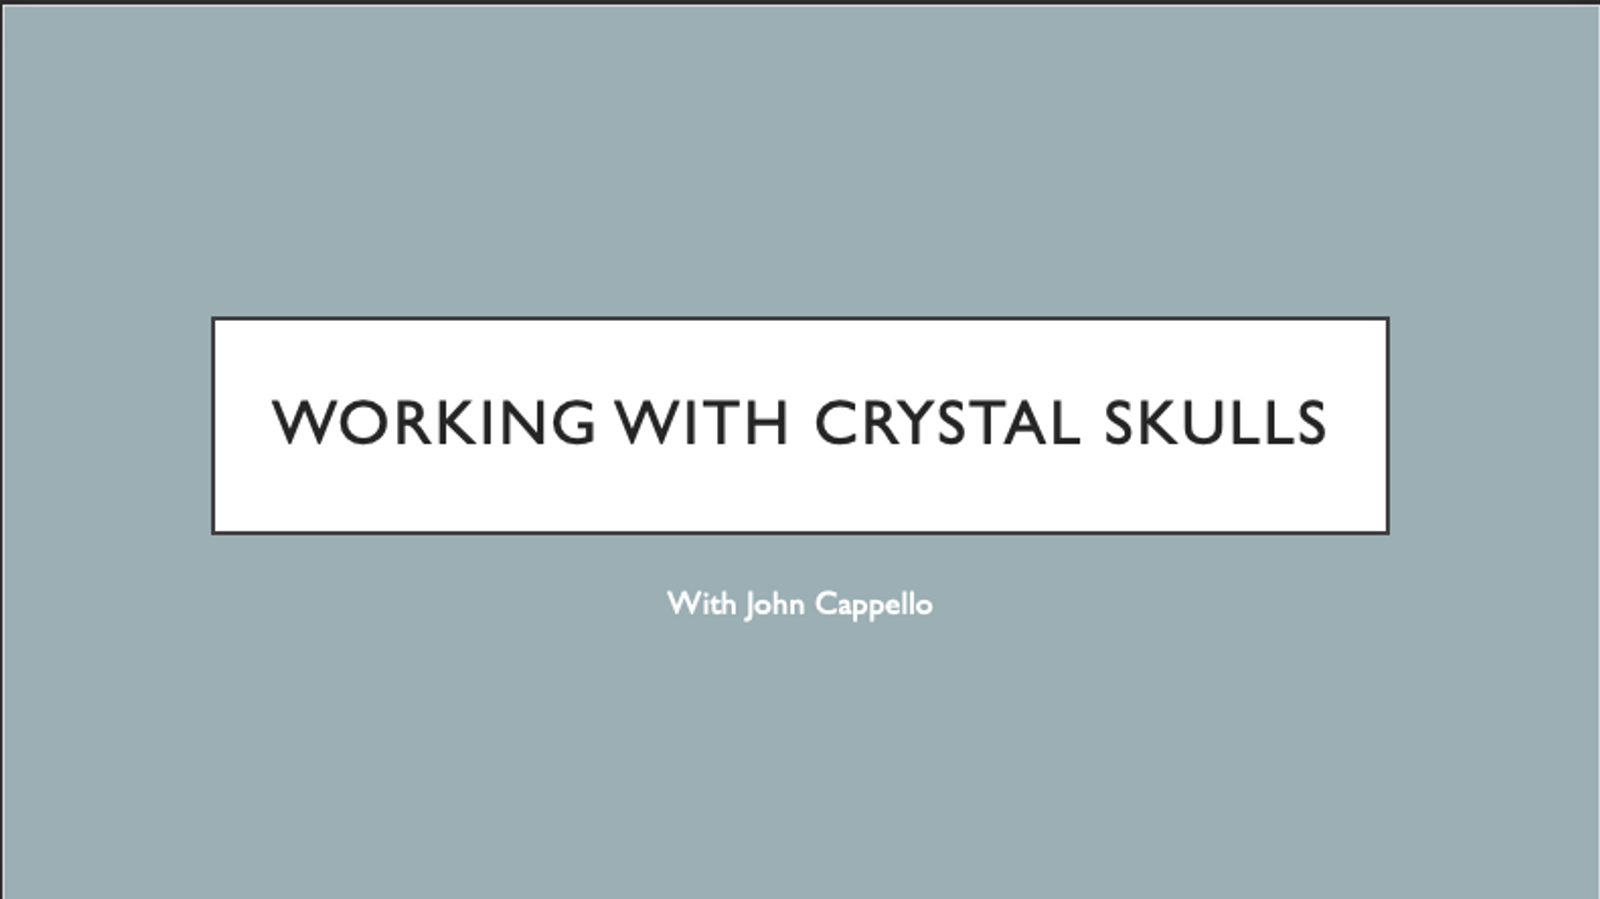 Working with Crystal Skulls - John Cappello